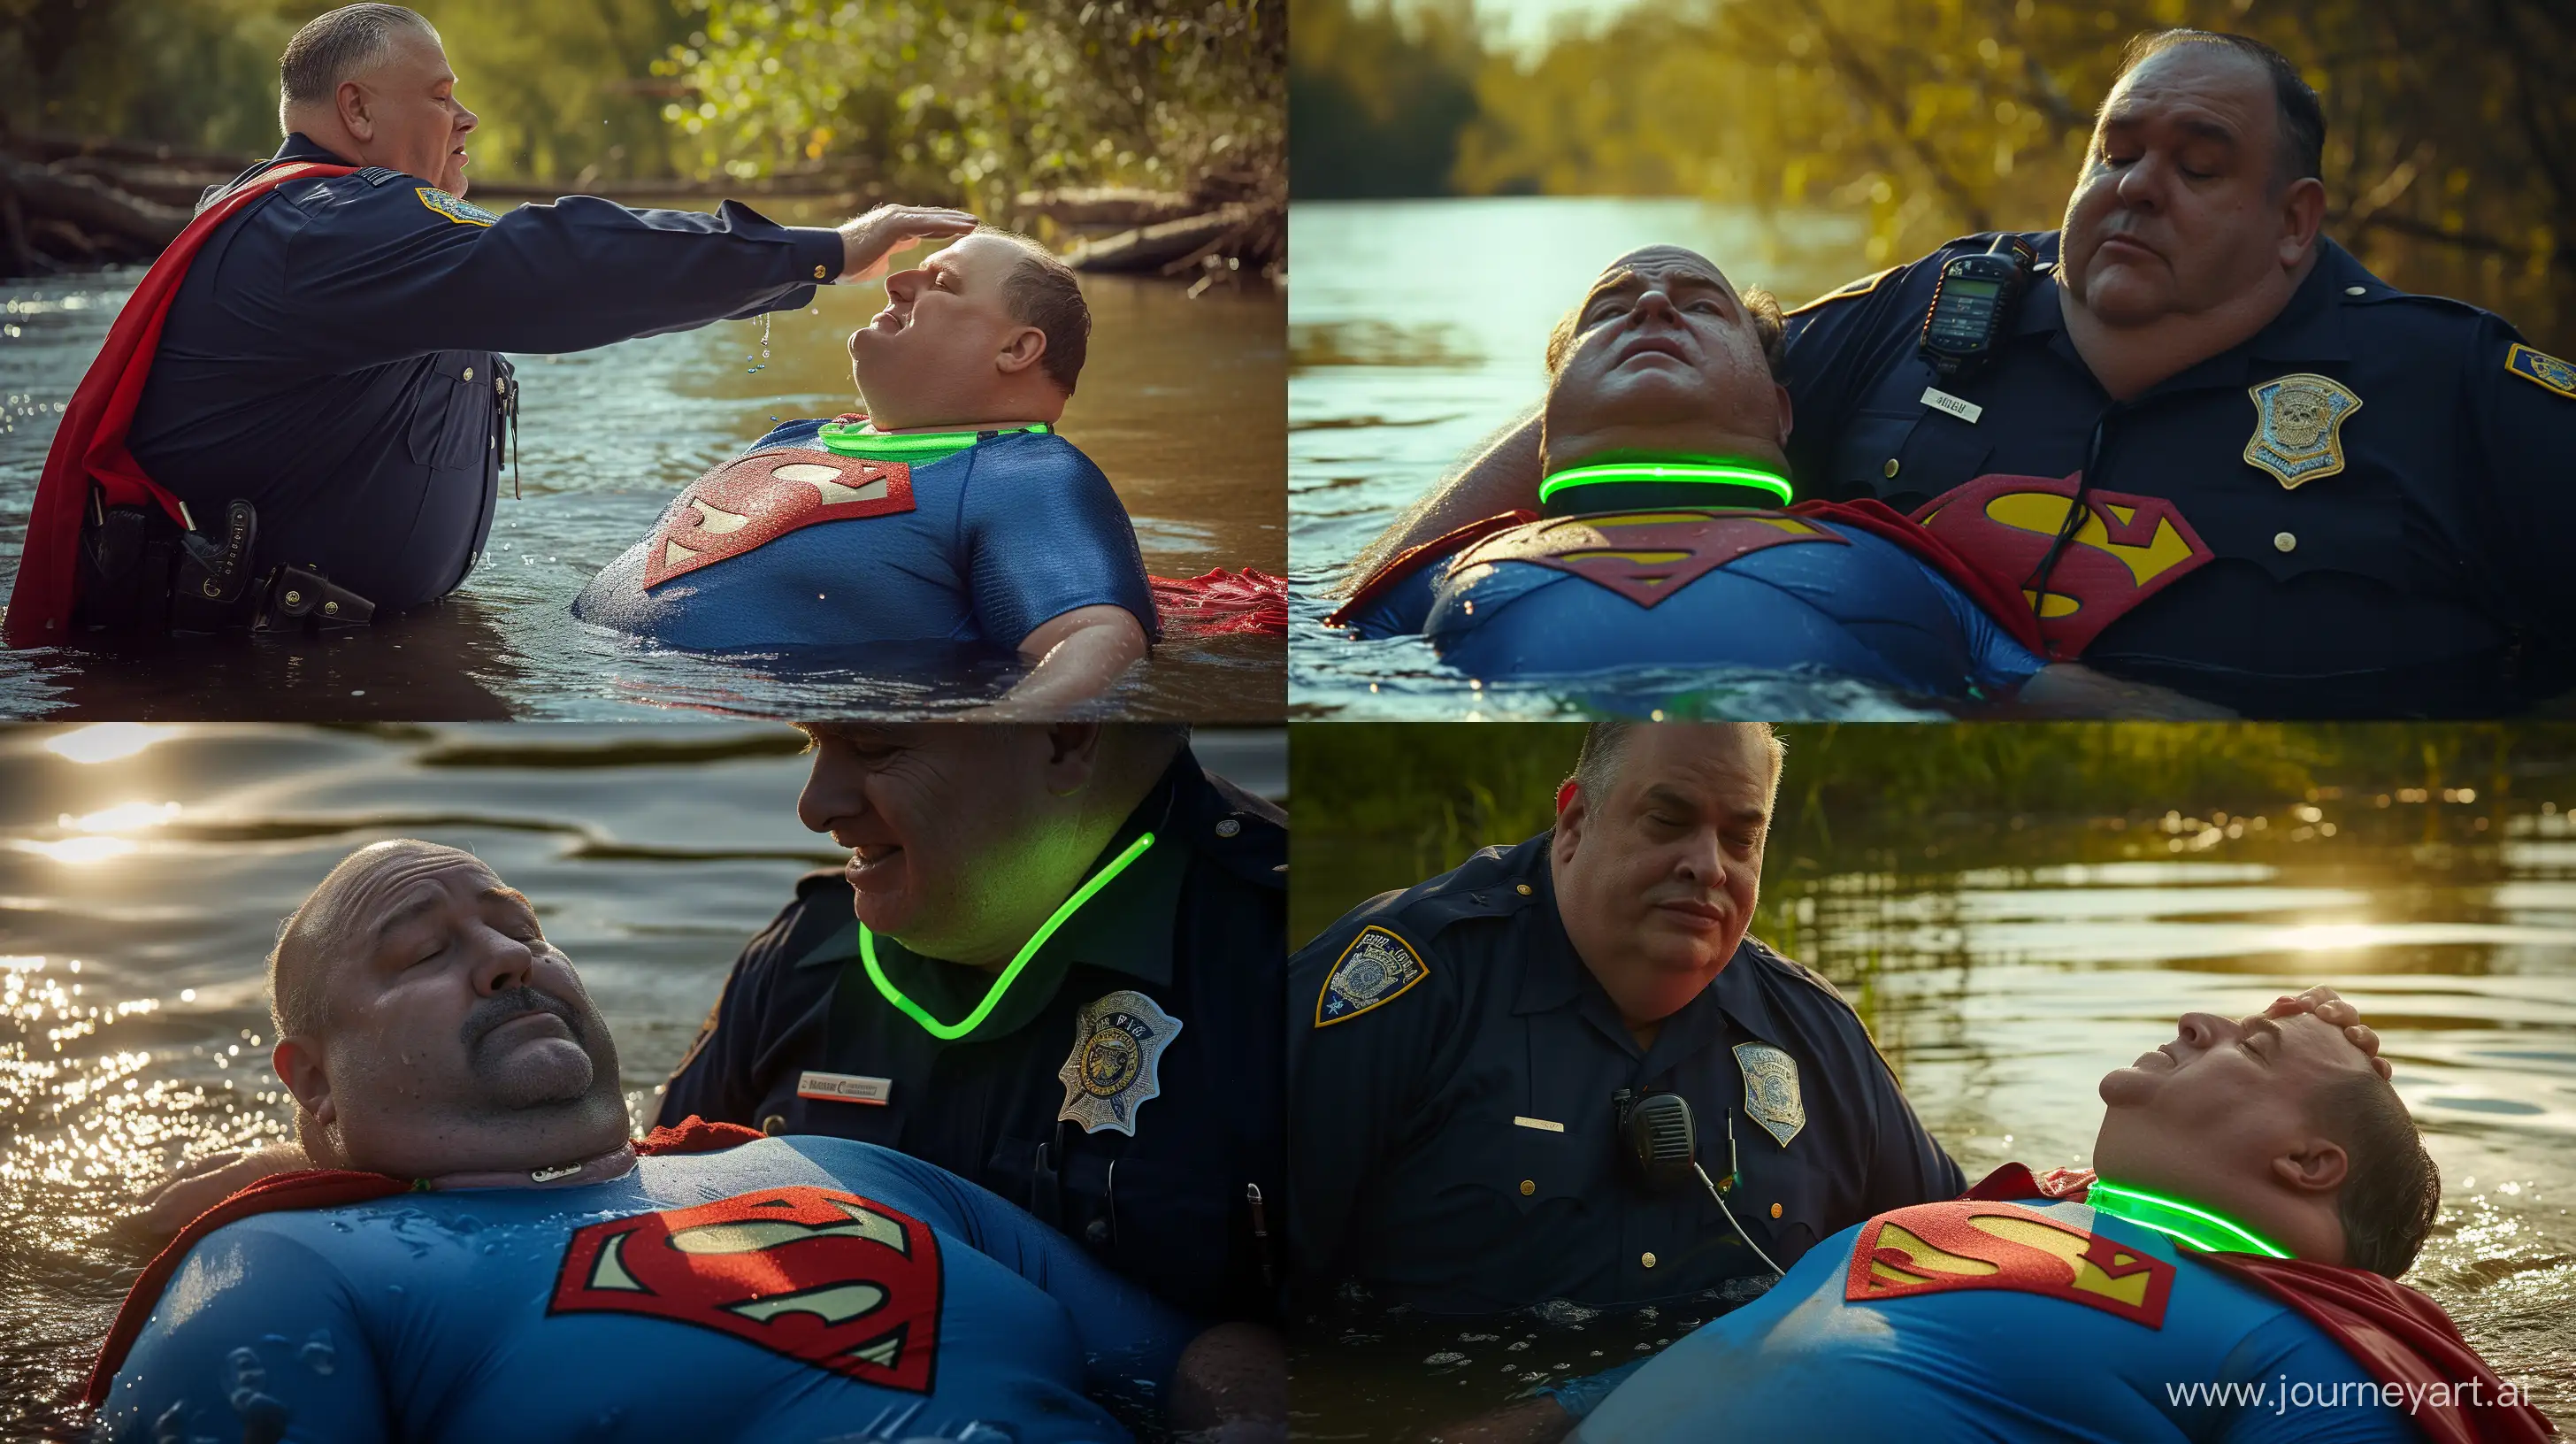 Close-up photo of a fat man aged 60 wearing a navy police uniform. Pulling the head of a fat man aged 60 wearing a tight blue 1978 smooth superman costume with a red cape and a tight green glowing neon dog collar lying in the water. Natural Light. River. --style raw --ar 16:9